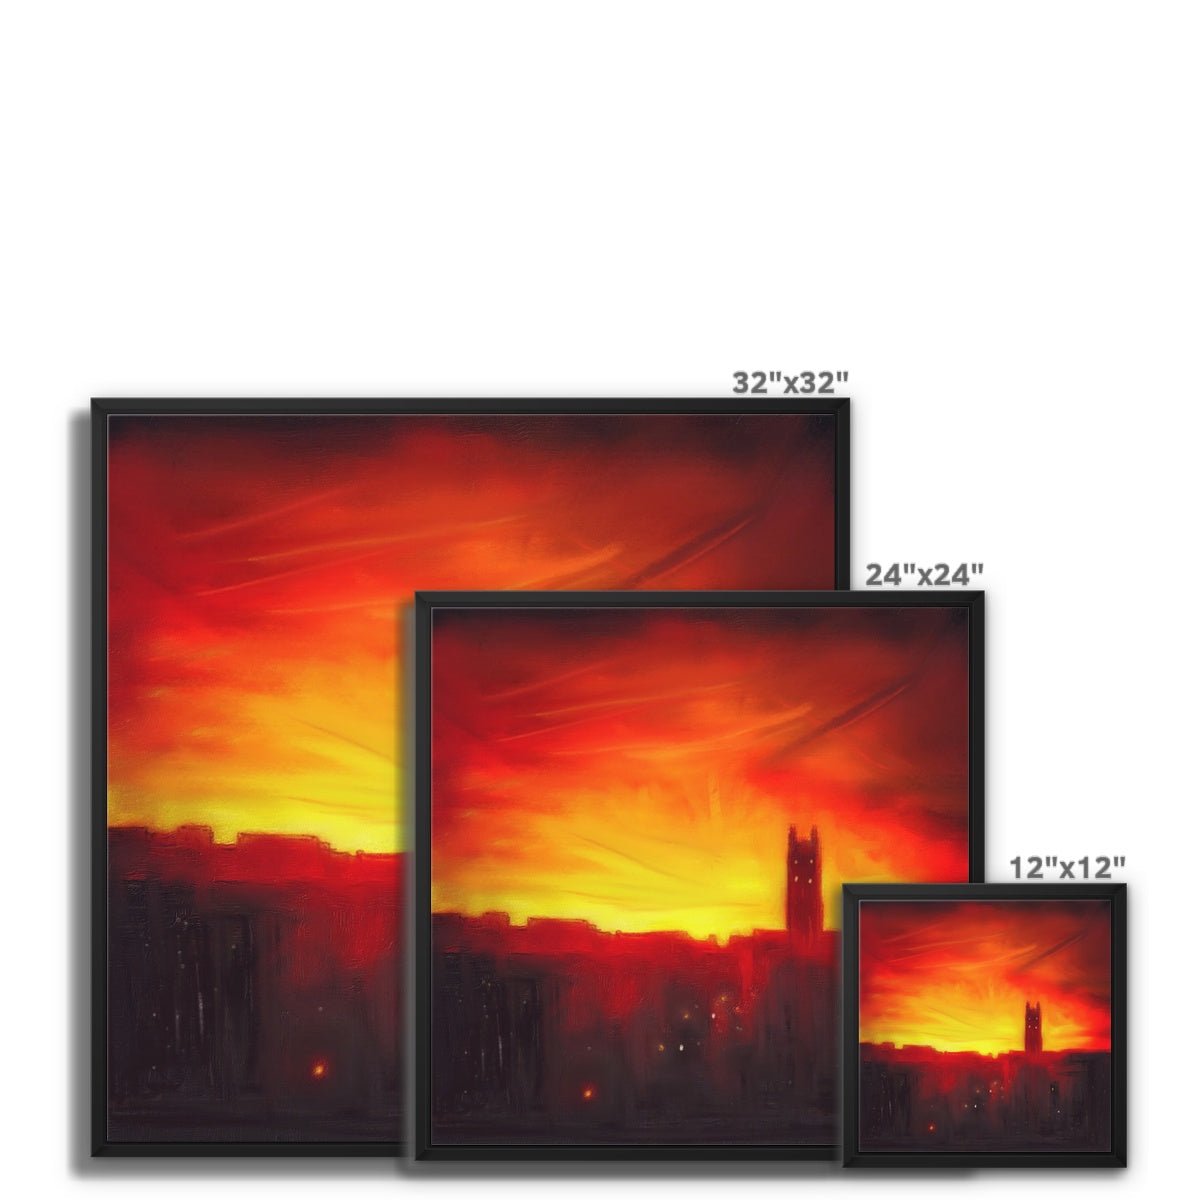 St Stephen's Church Sunset Painting | Framed Canvas From Scotland-Floating Framed Canvas Prints-Edinburgh & Glasgow Art Gallery-Paintings, Prints, Homeware, Art Gifts From Scotland By Scottish Artist Kevin Hunter